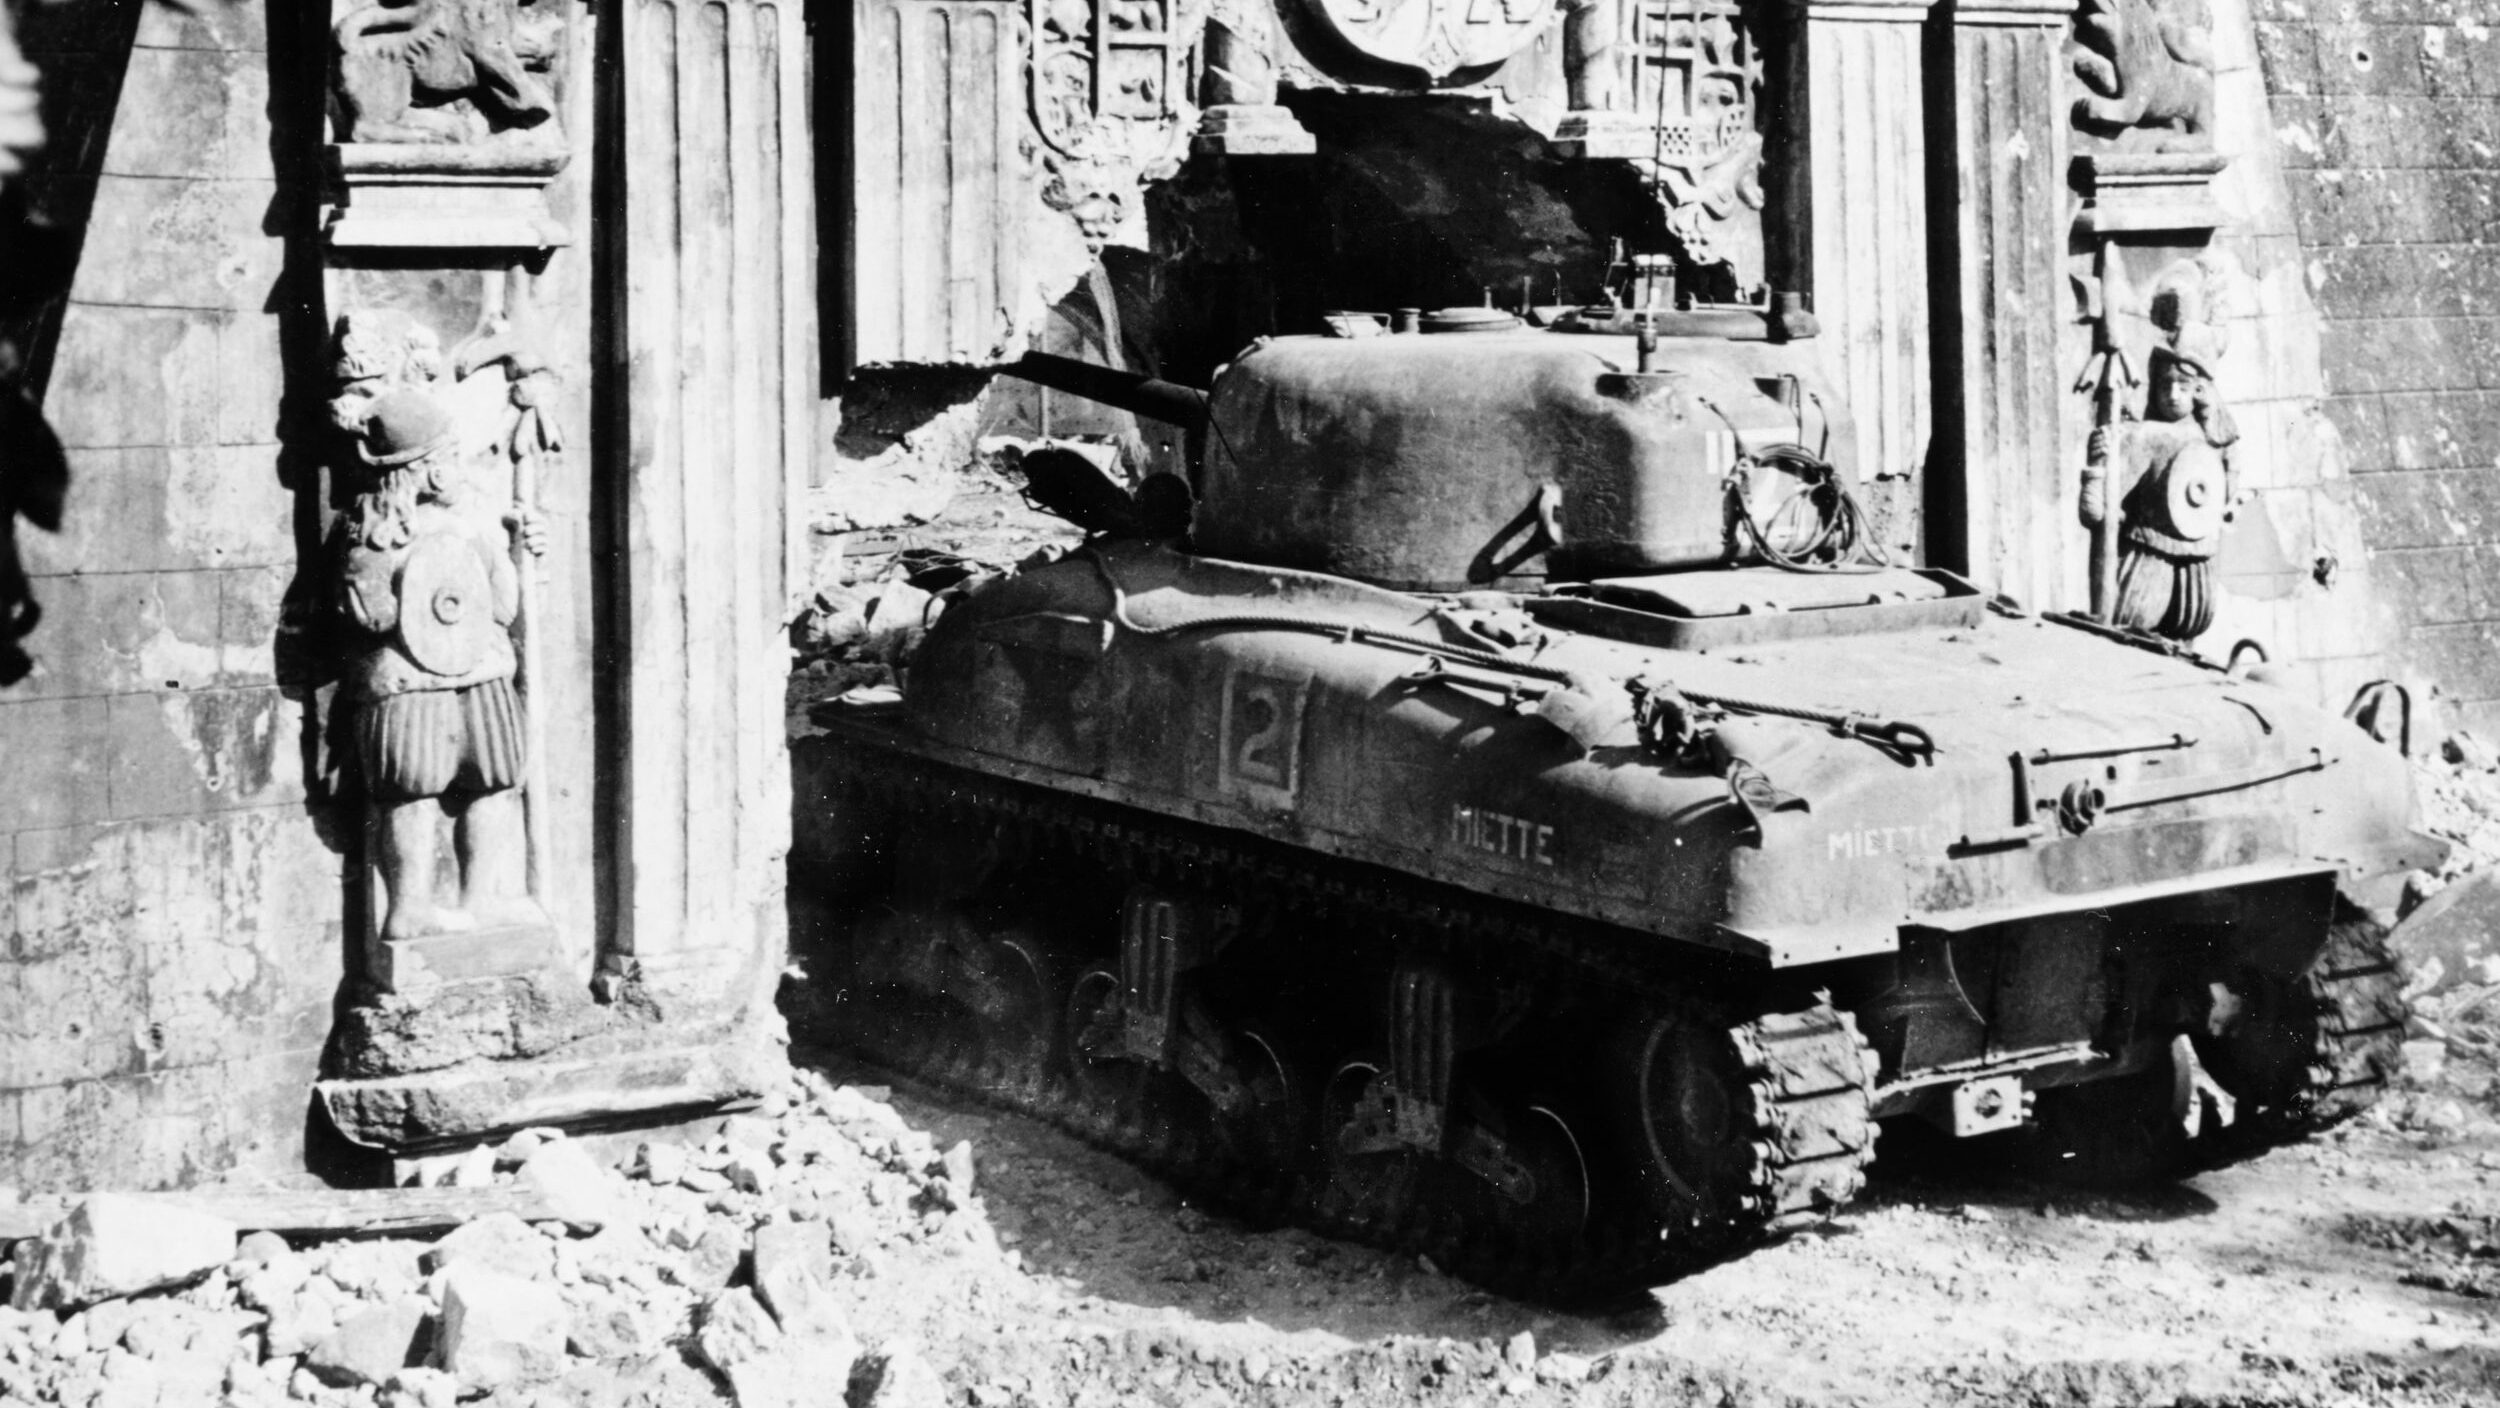 An M4 Sherman medium tank of the U.S. Army enters Old Fort Santiago in the city of Manila after the bitter fighting to liberate the “Pearl of the Orient” from Japanese occupation. This photo was taken on February 26, 1945